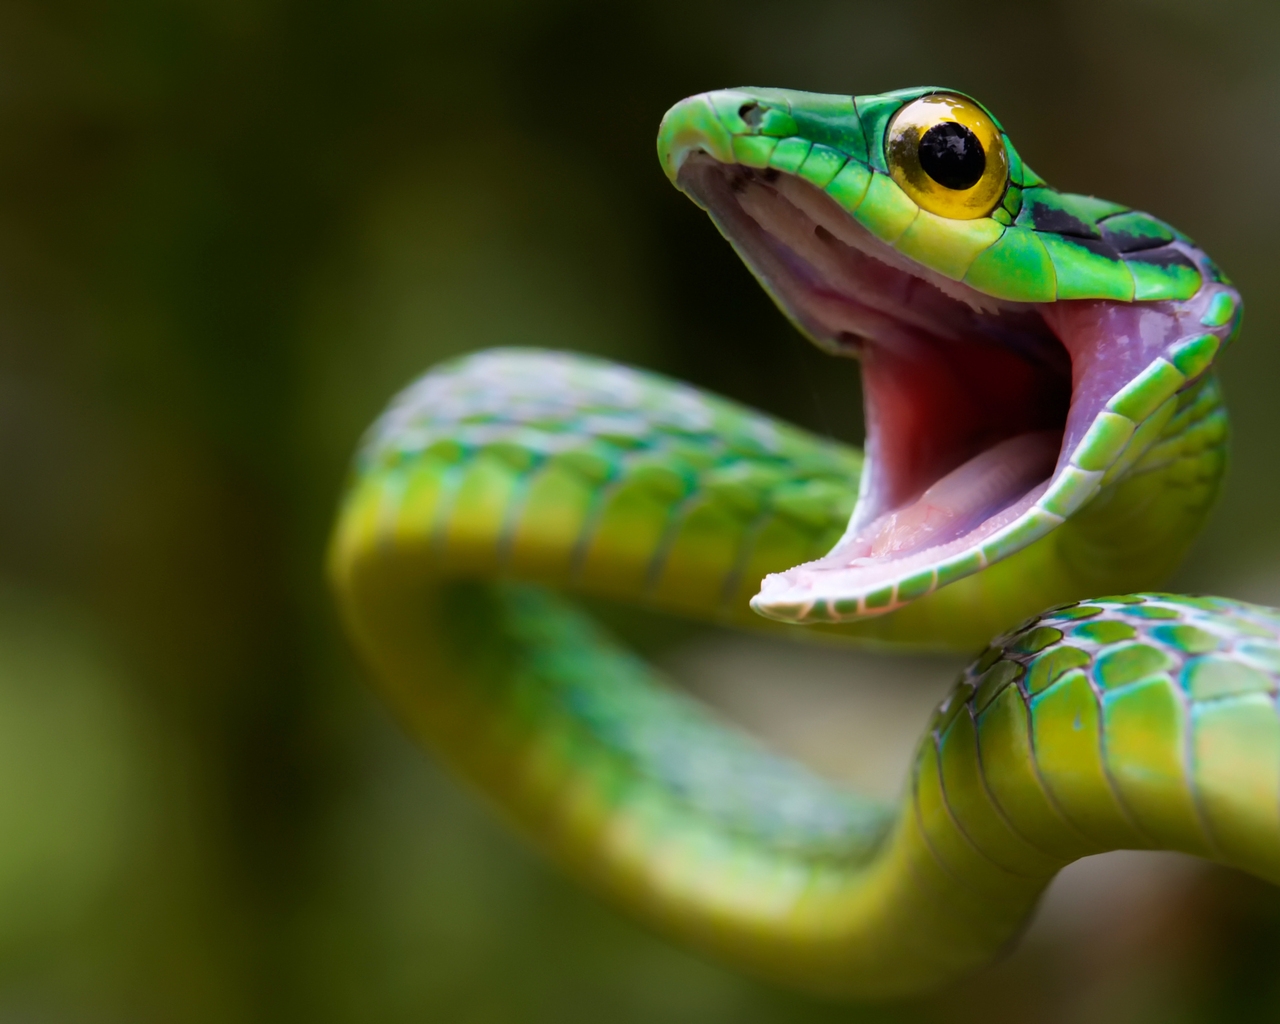 Green Snake Attack for 1280 x 1024 resolution